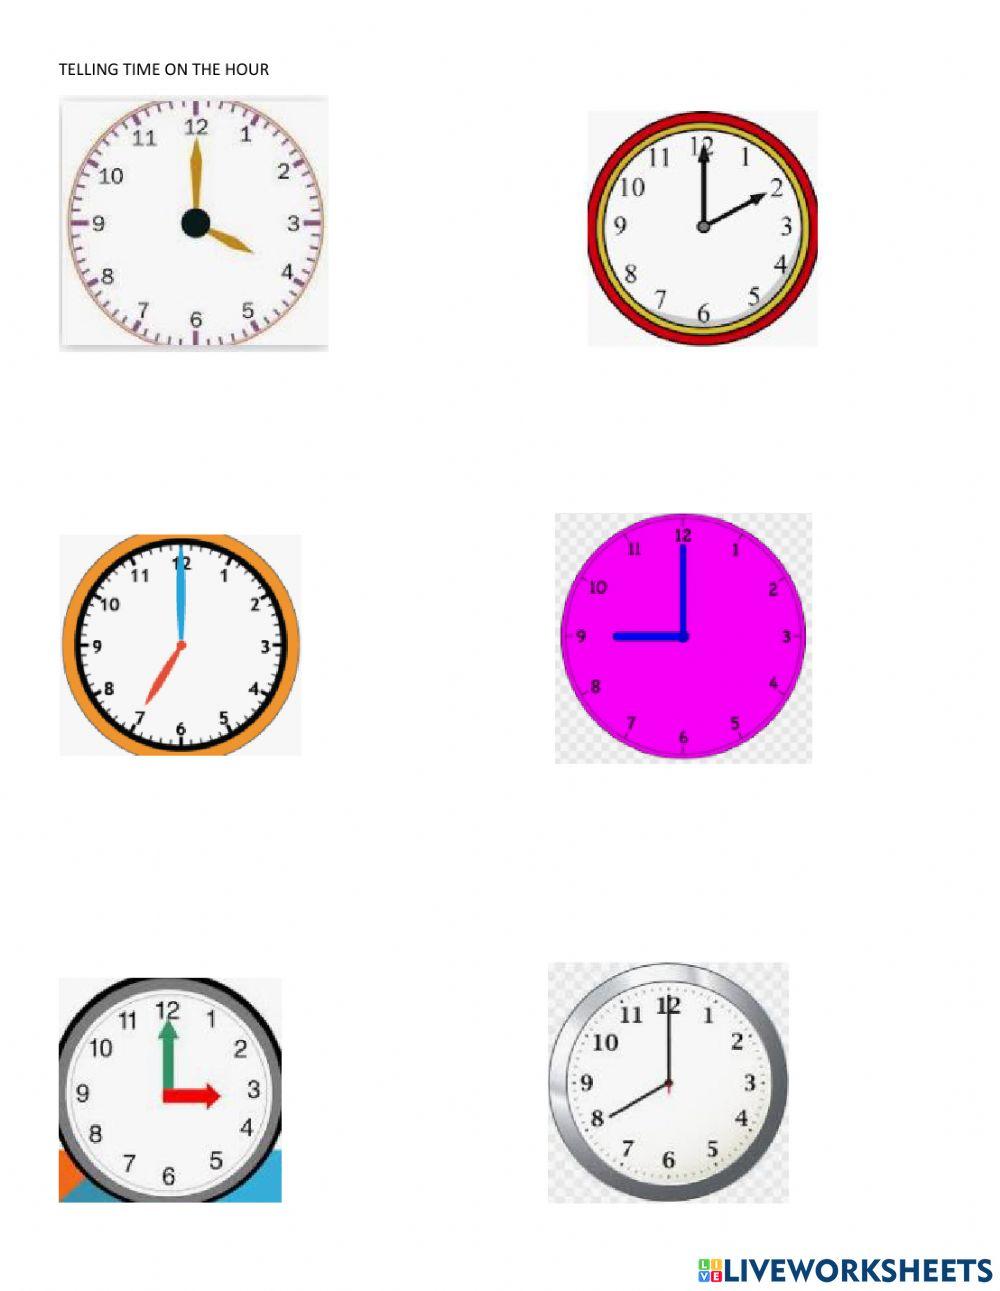 Telling Time on the hour and half past